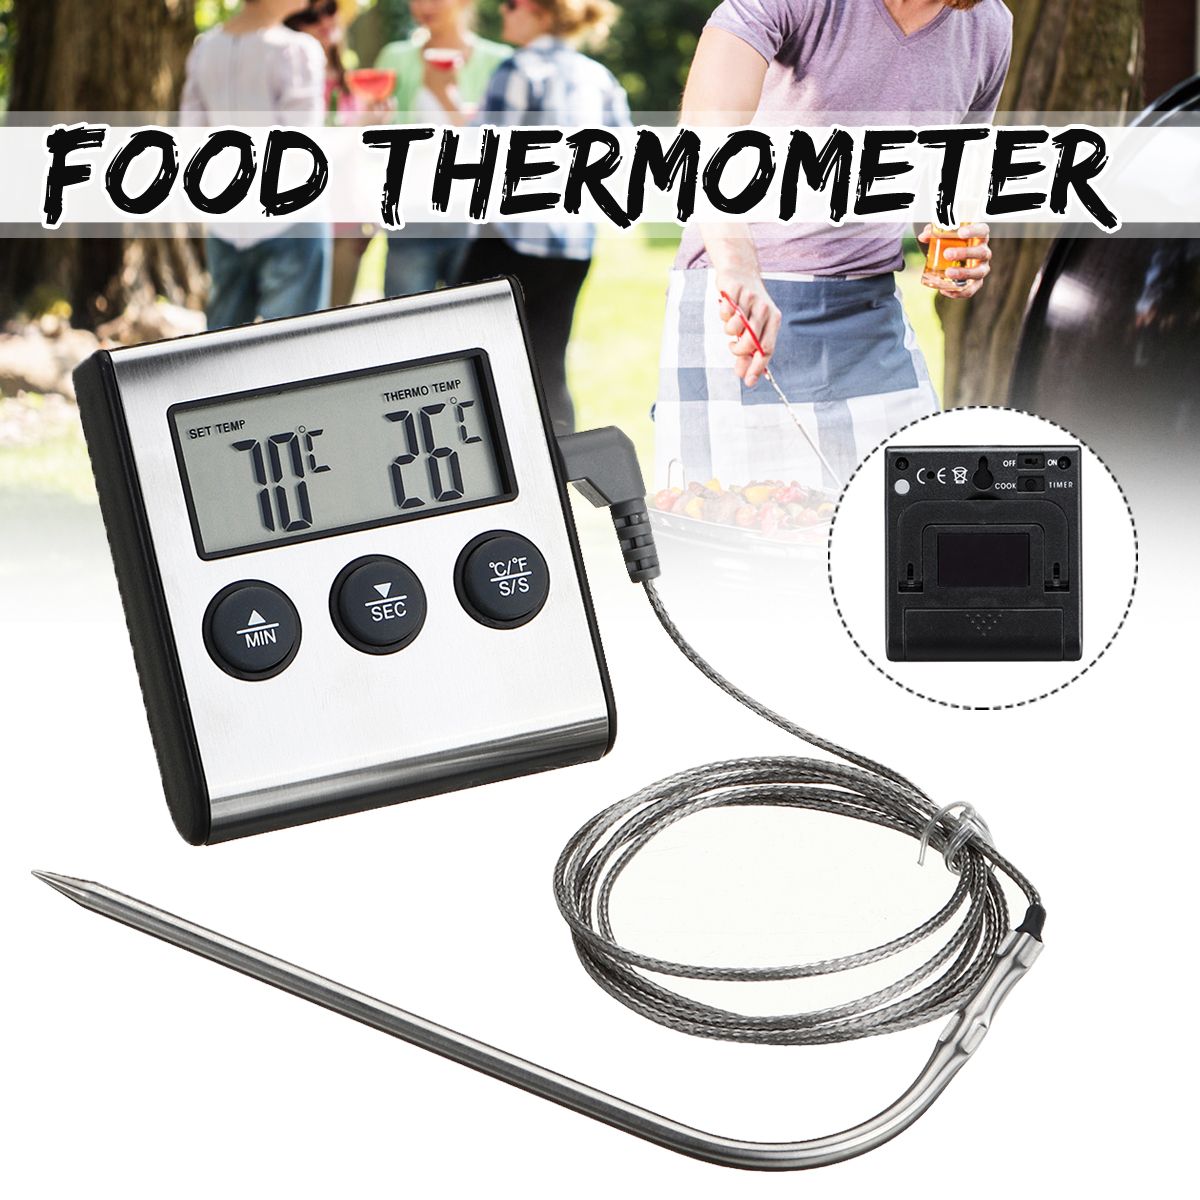 Digital-Thermometer-Kitchen-Food-Cooking-Meat-BBQ-Probe-Thermometer-Cooking-Tools-1579313